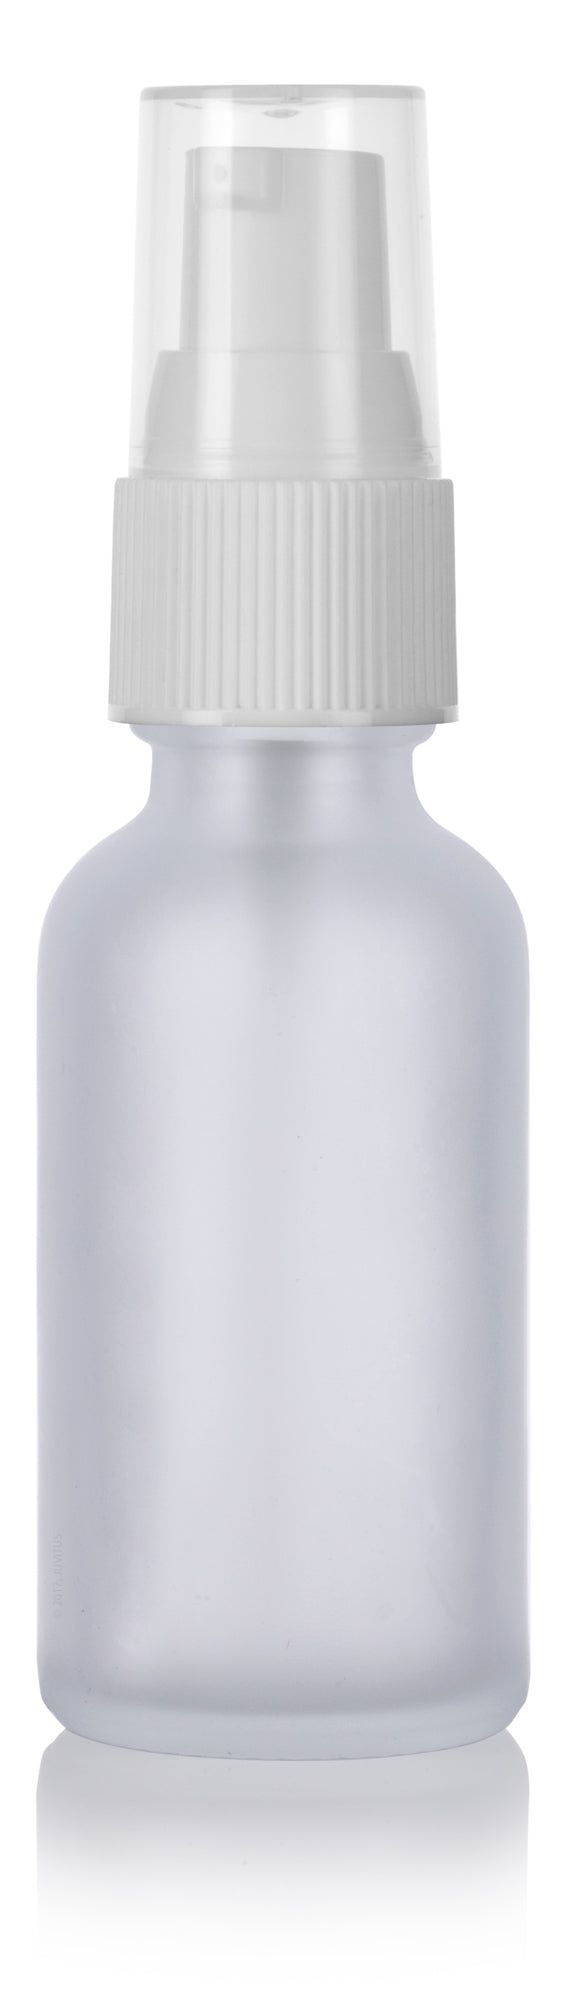 Frosted Clear Glass Boston Round Treatment Pump Bottle with White Top - 1 oz / 30 ml